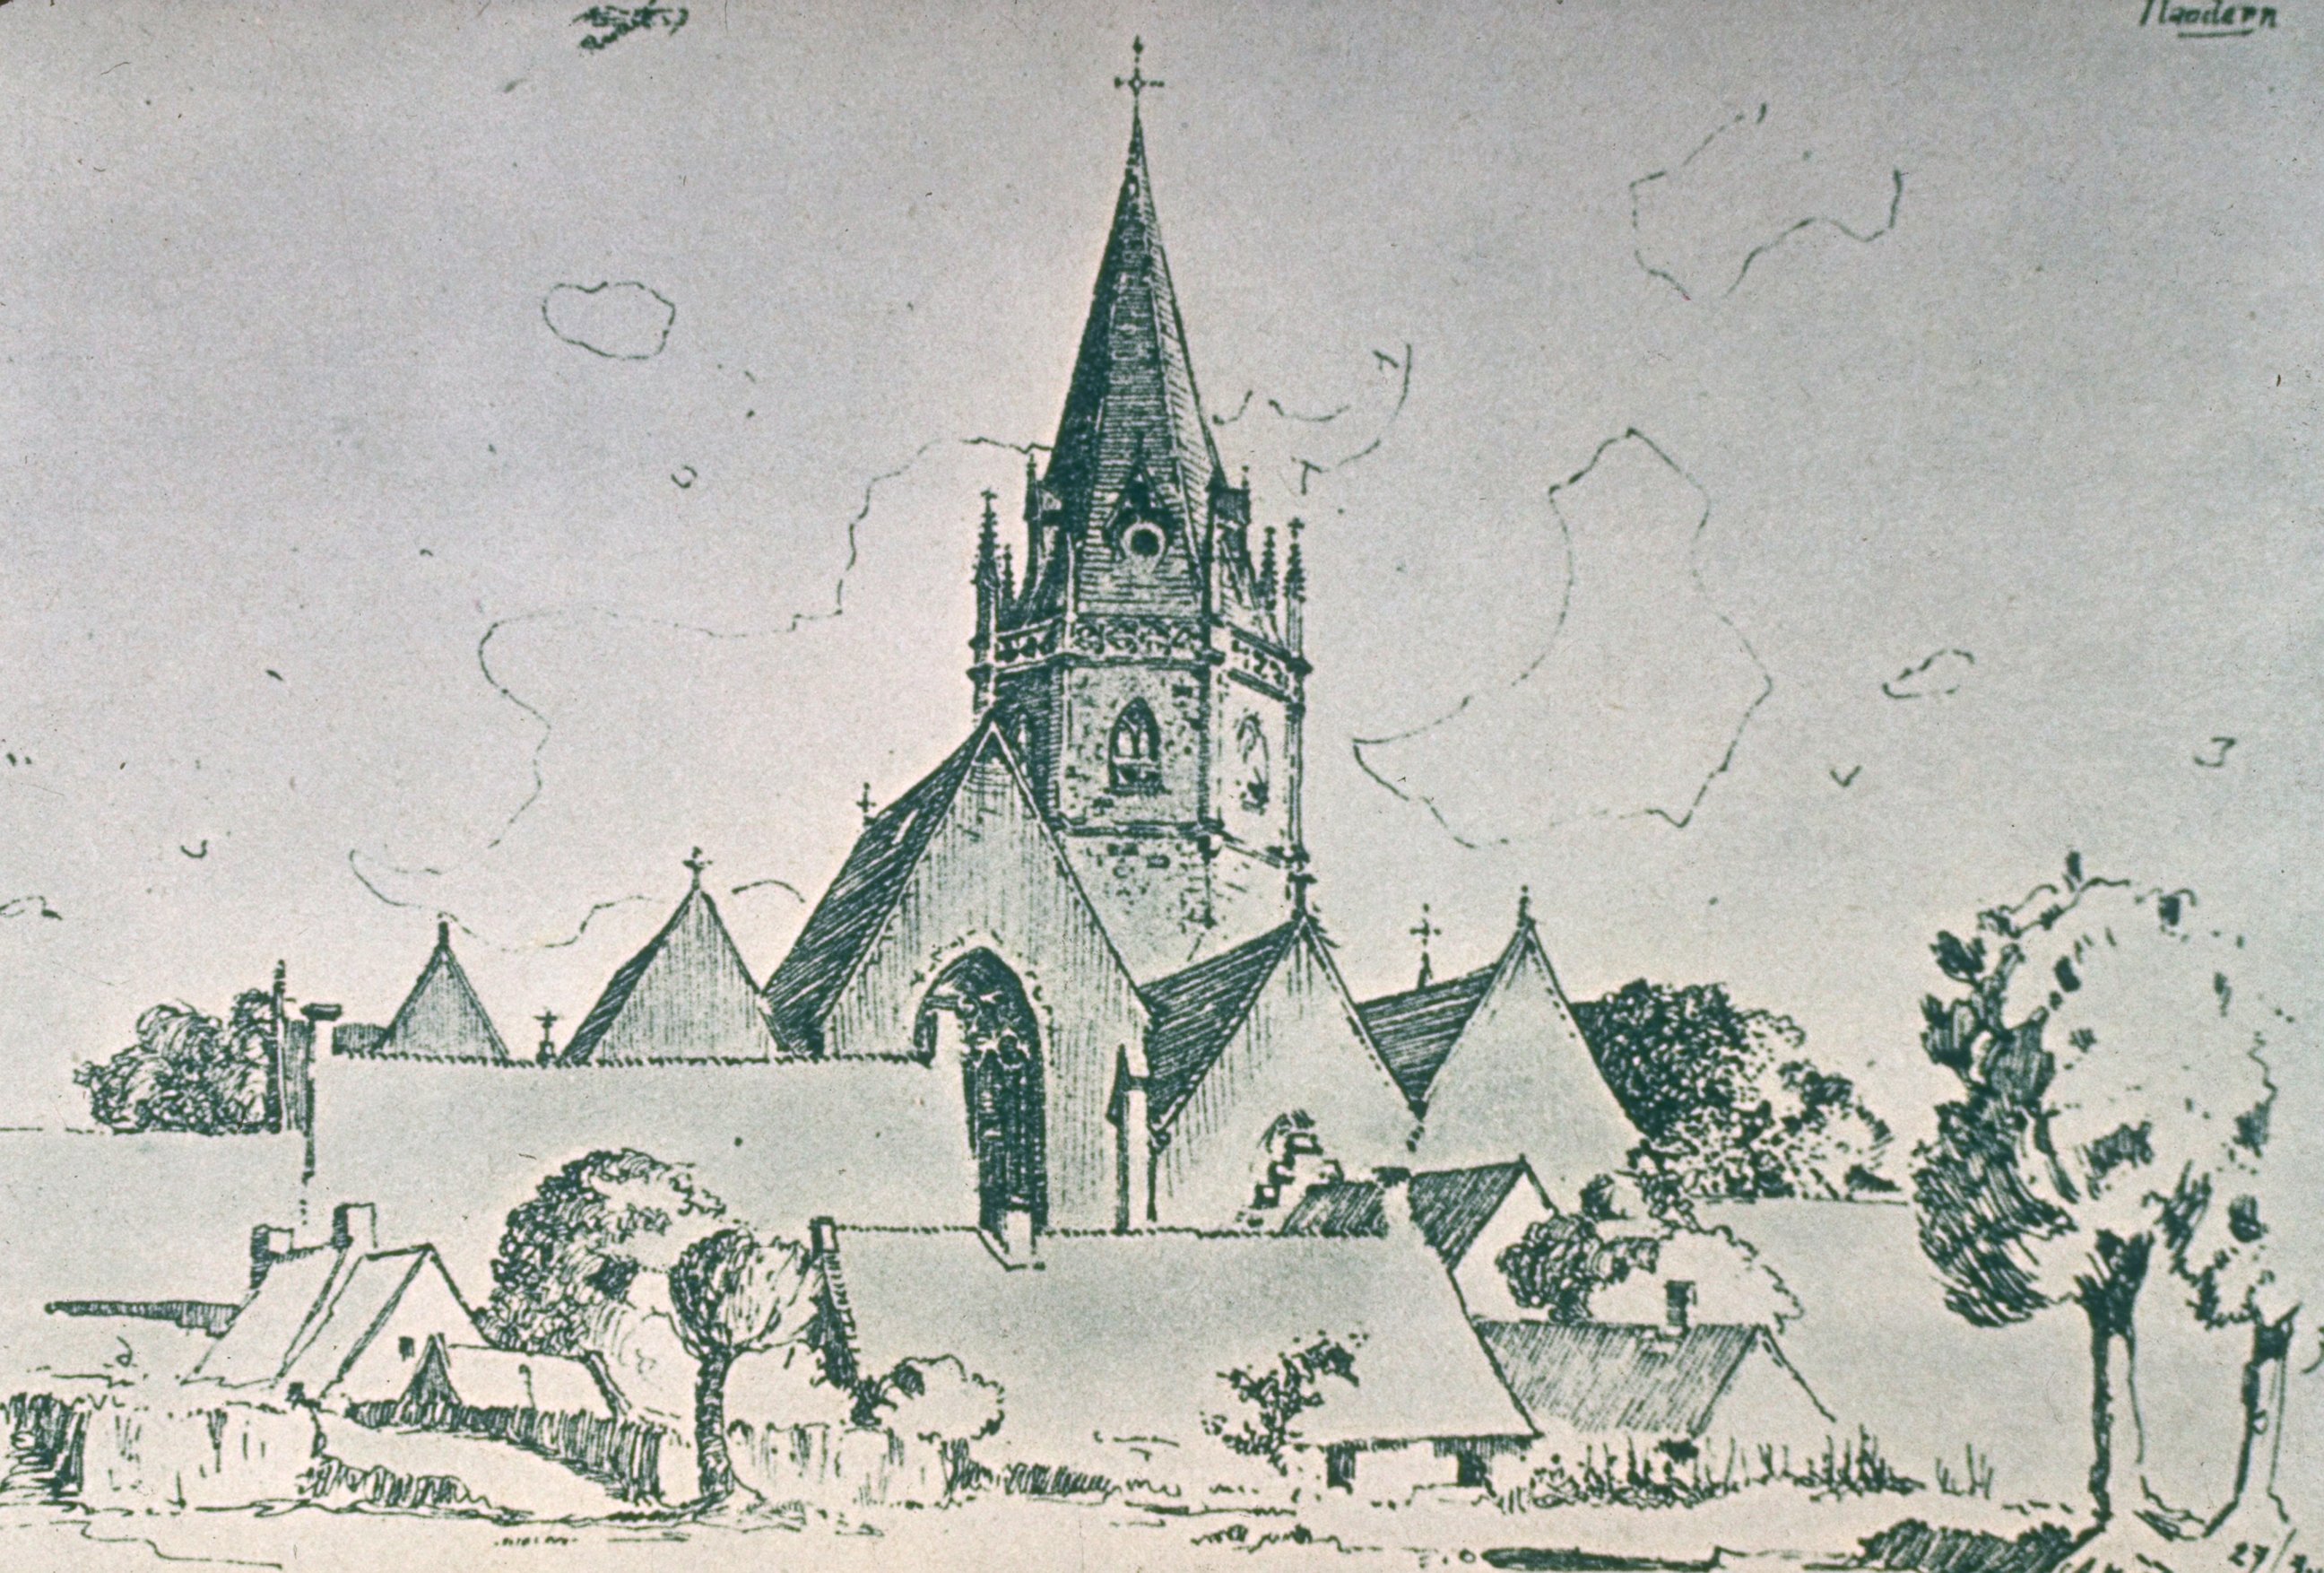 PHOTO: Drawing of an unidentified church by Adolf Hitler, early 1900's.